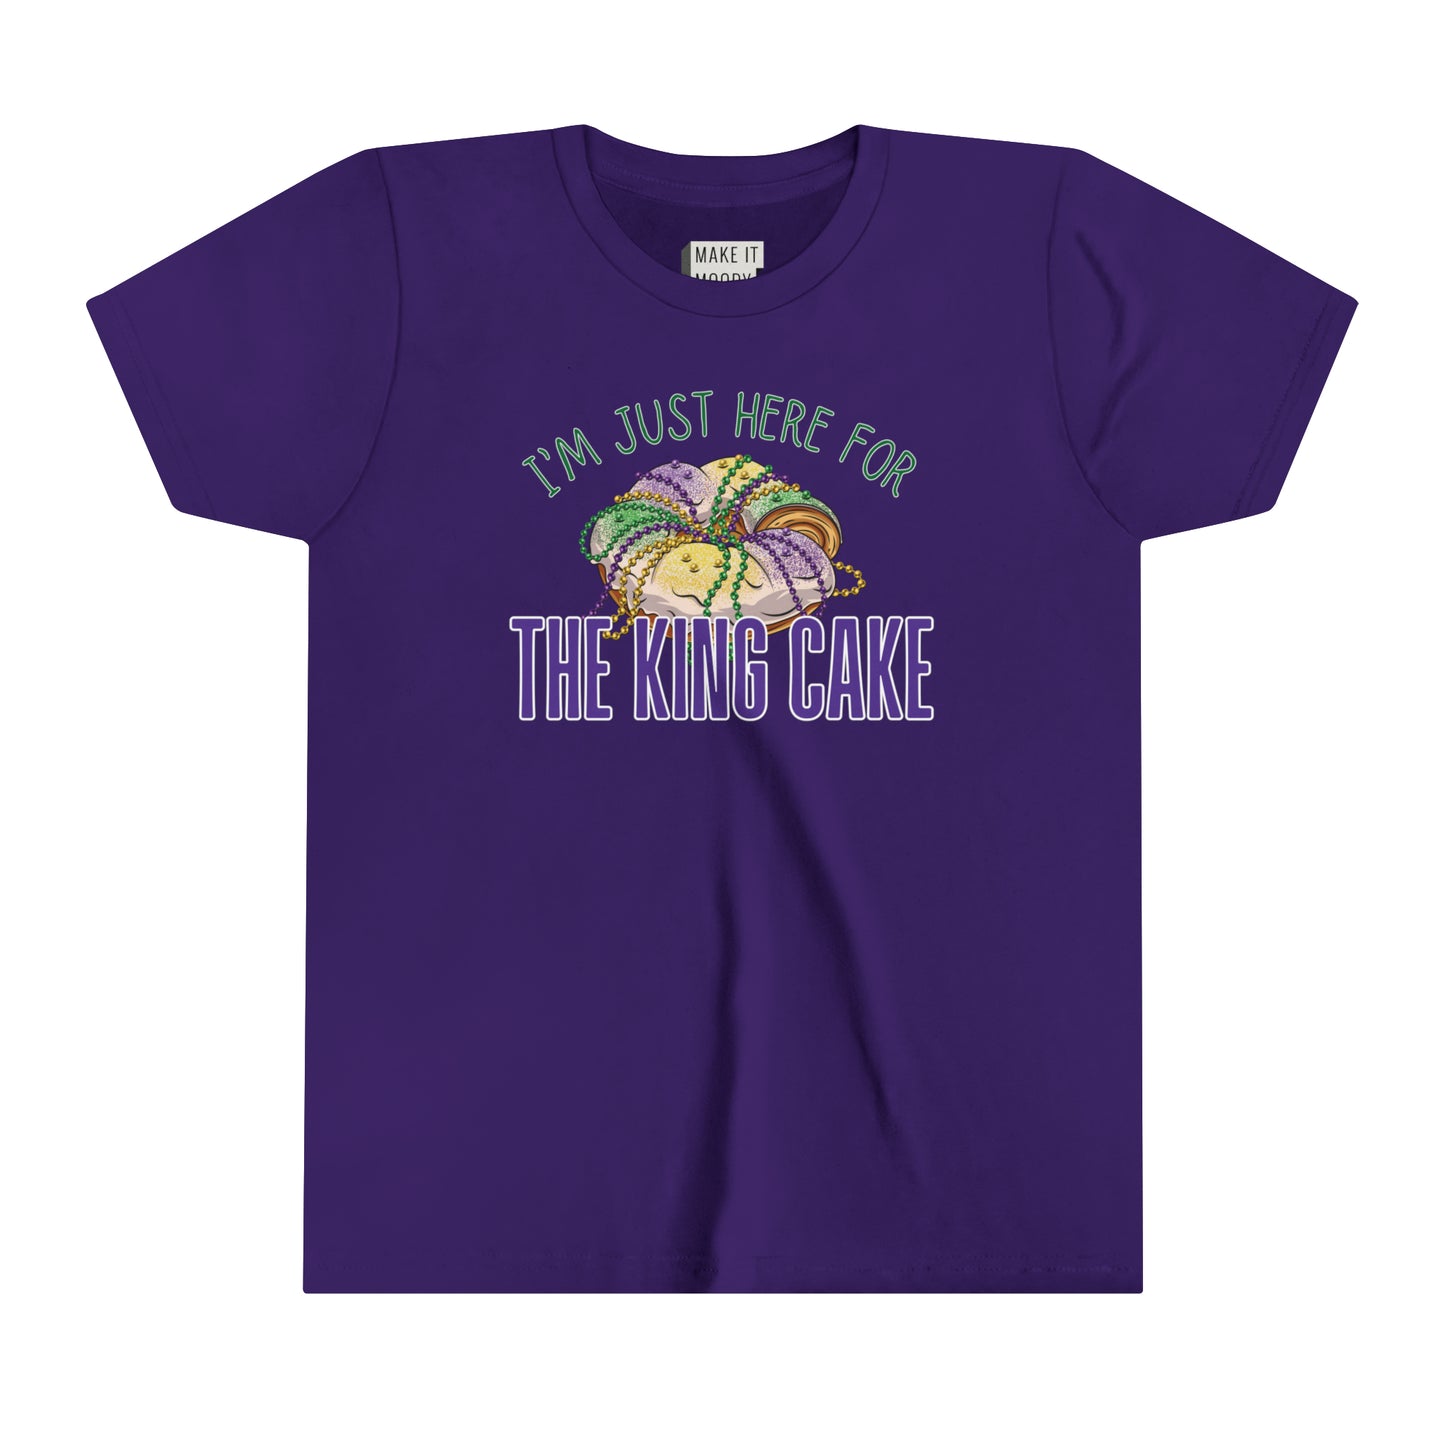 "I'm Just Here for the King Cake" Mardi Gras Tee for Kids